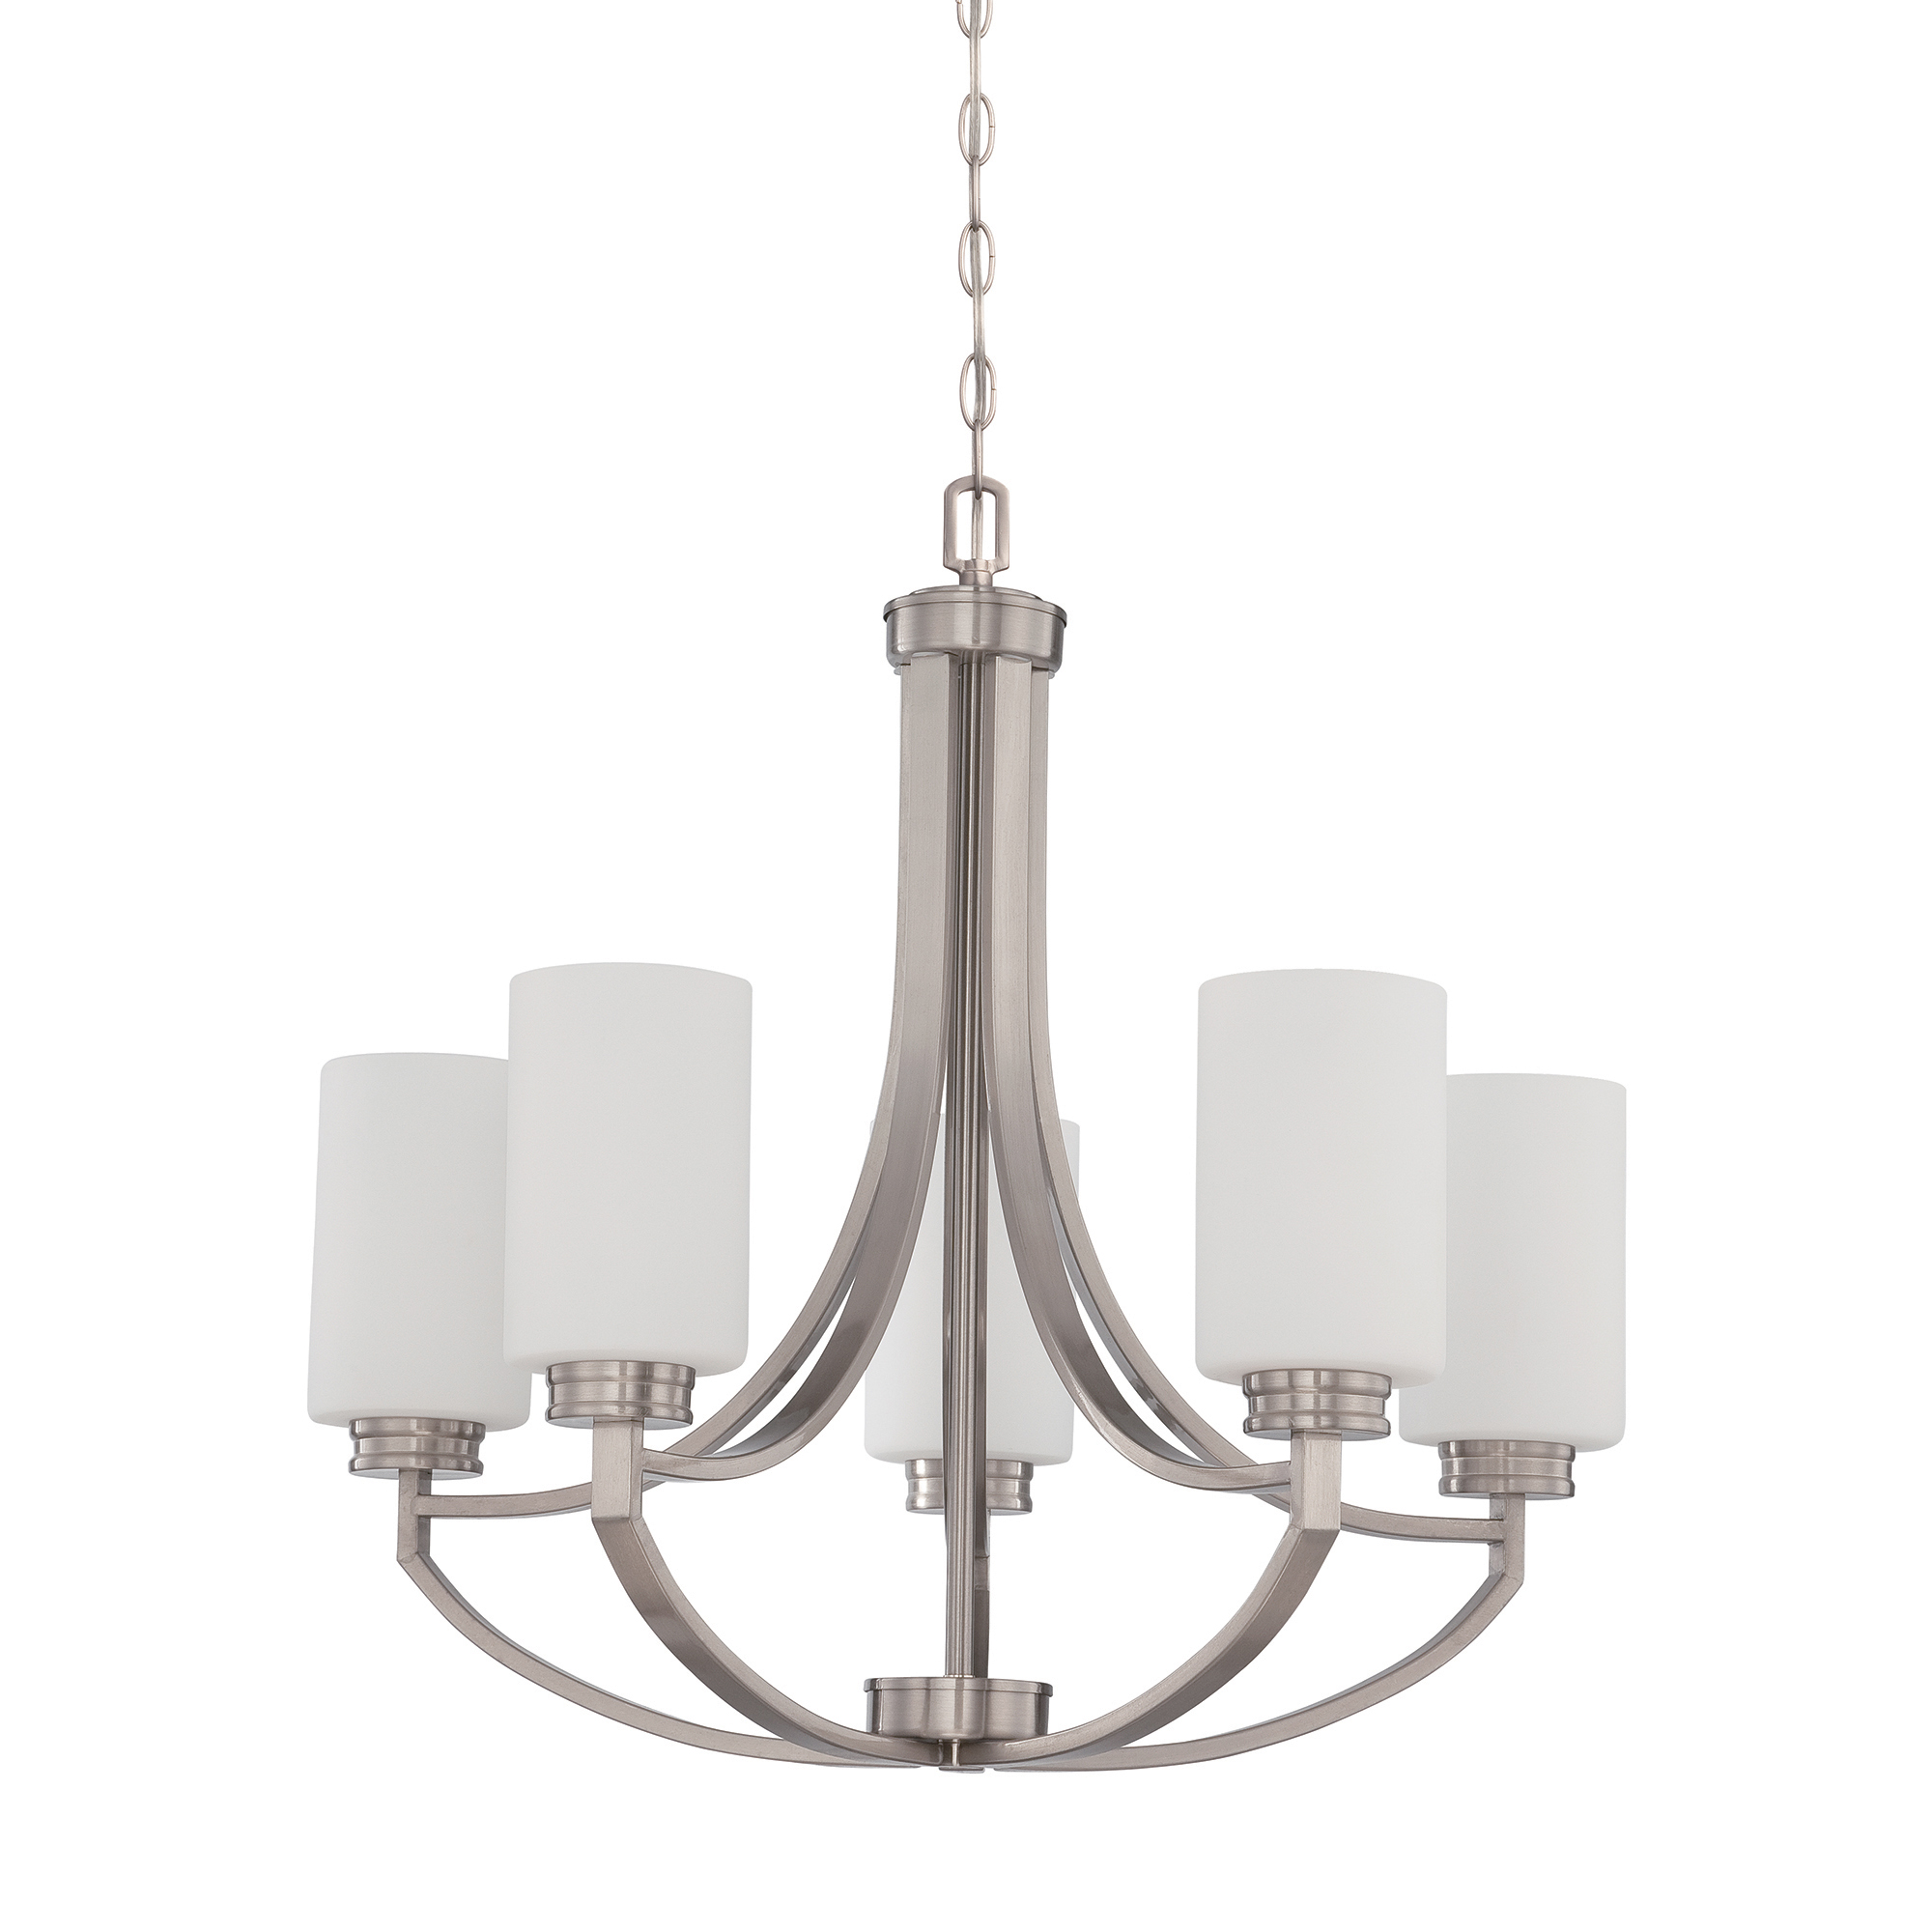 Sunset Lighting Dalton Five Light Chandelier - Opal Etched Glass, Dimmable - With Bright Satin Nickel Finish